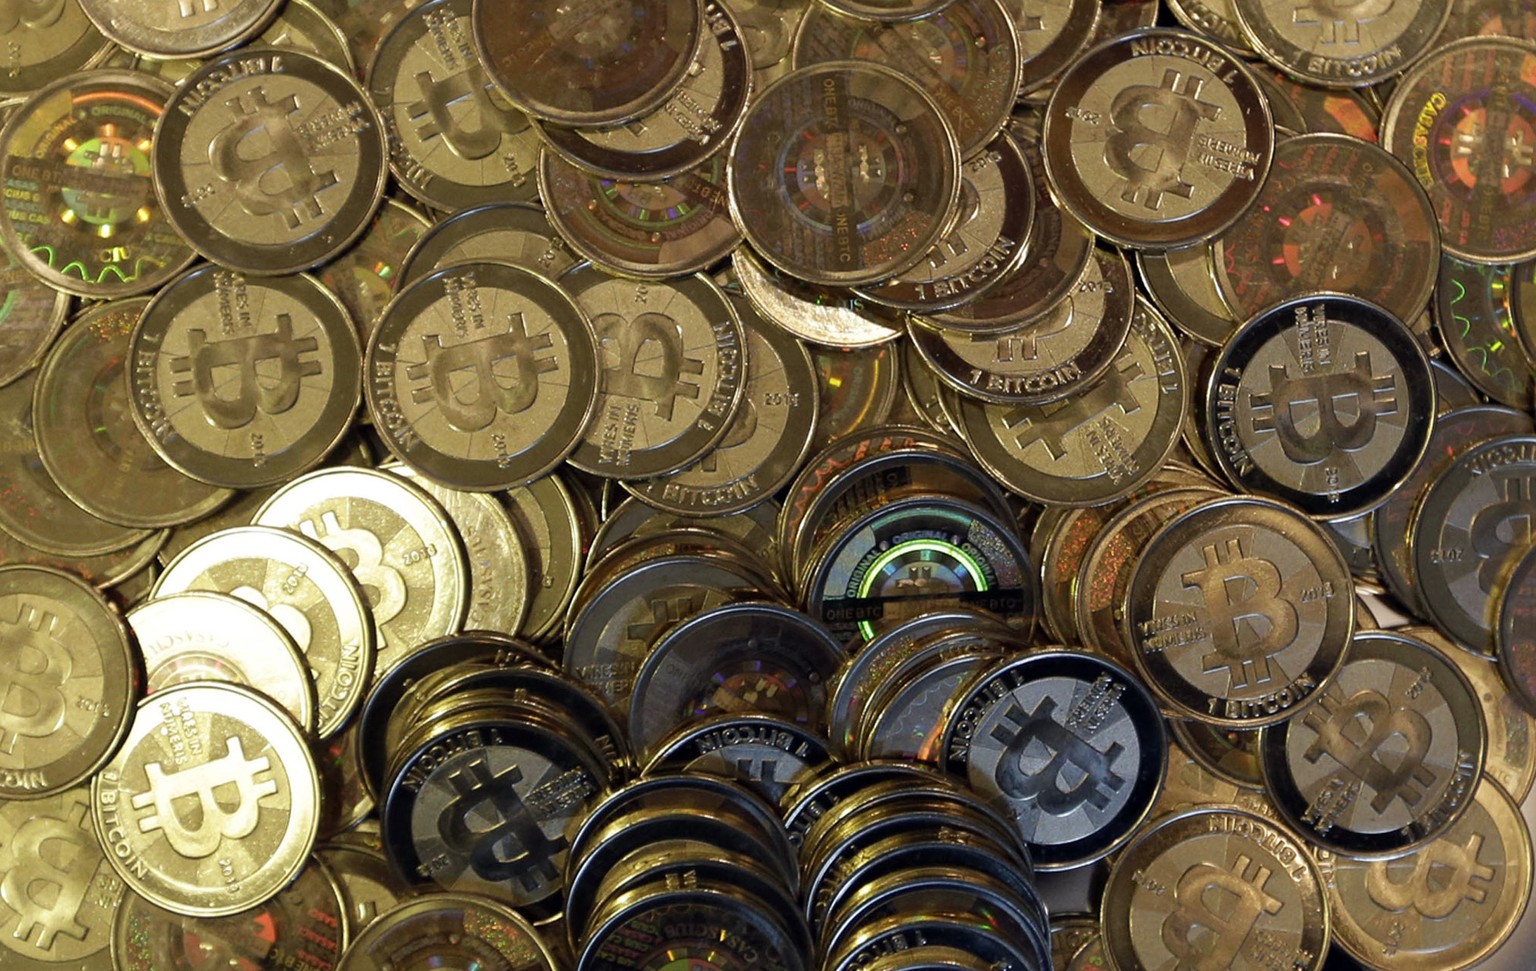 FILE - This April 3, 2013, file photo shows bitcoin tokens in Sandy, Utah. Unidentified hackers broke into the Twitter accounts of technology moguls, politicians, celebrities and major companies Wedne ...